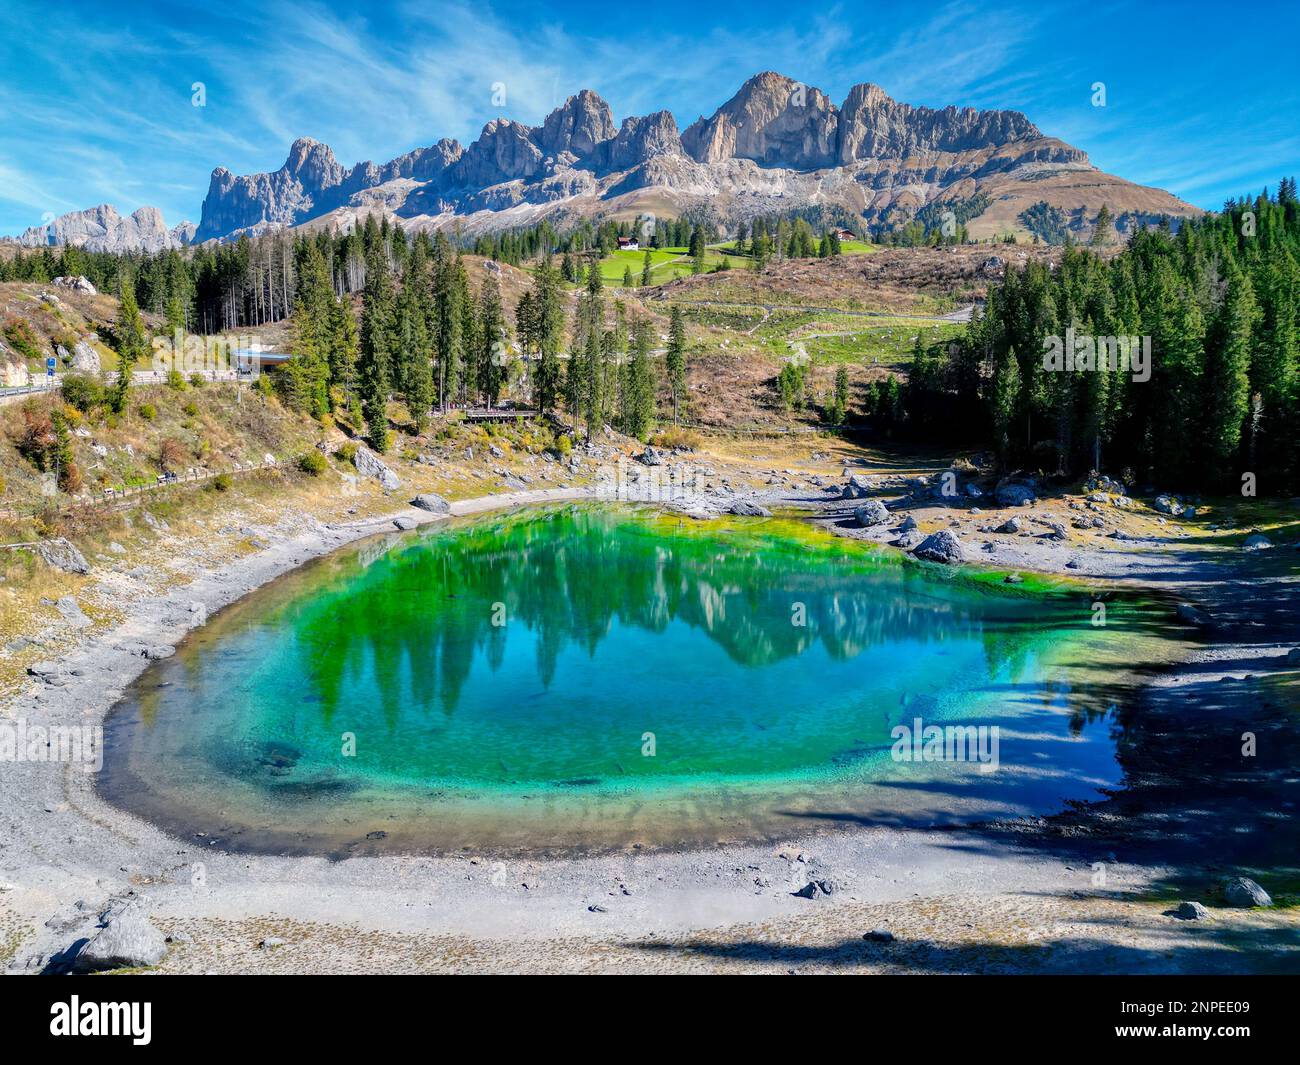 Lago di Carezza, also known as Lake Carezza or Karersee is one of the most beautiful lakes in the Dolomites region. It is known for its emerald green Stock Photo